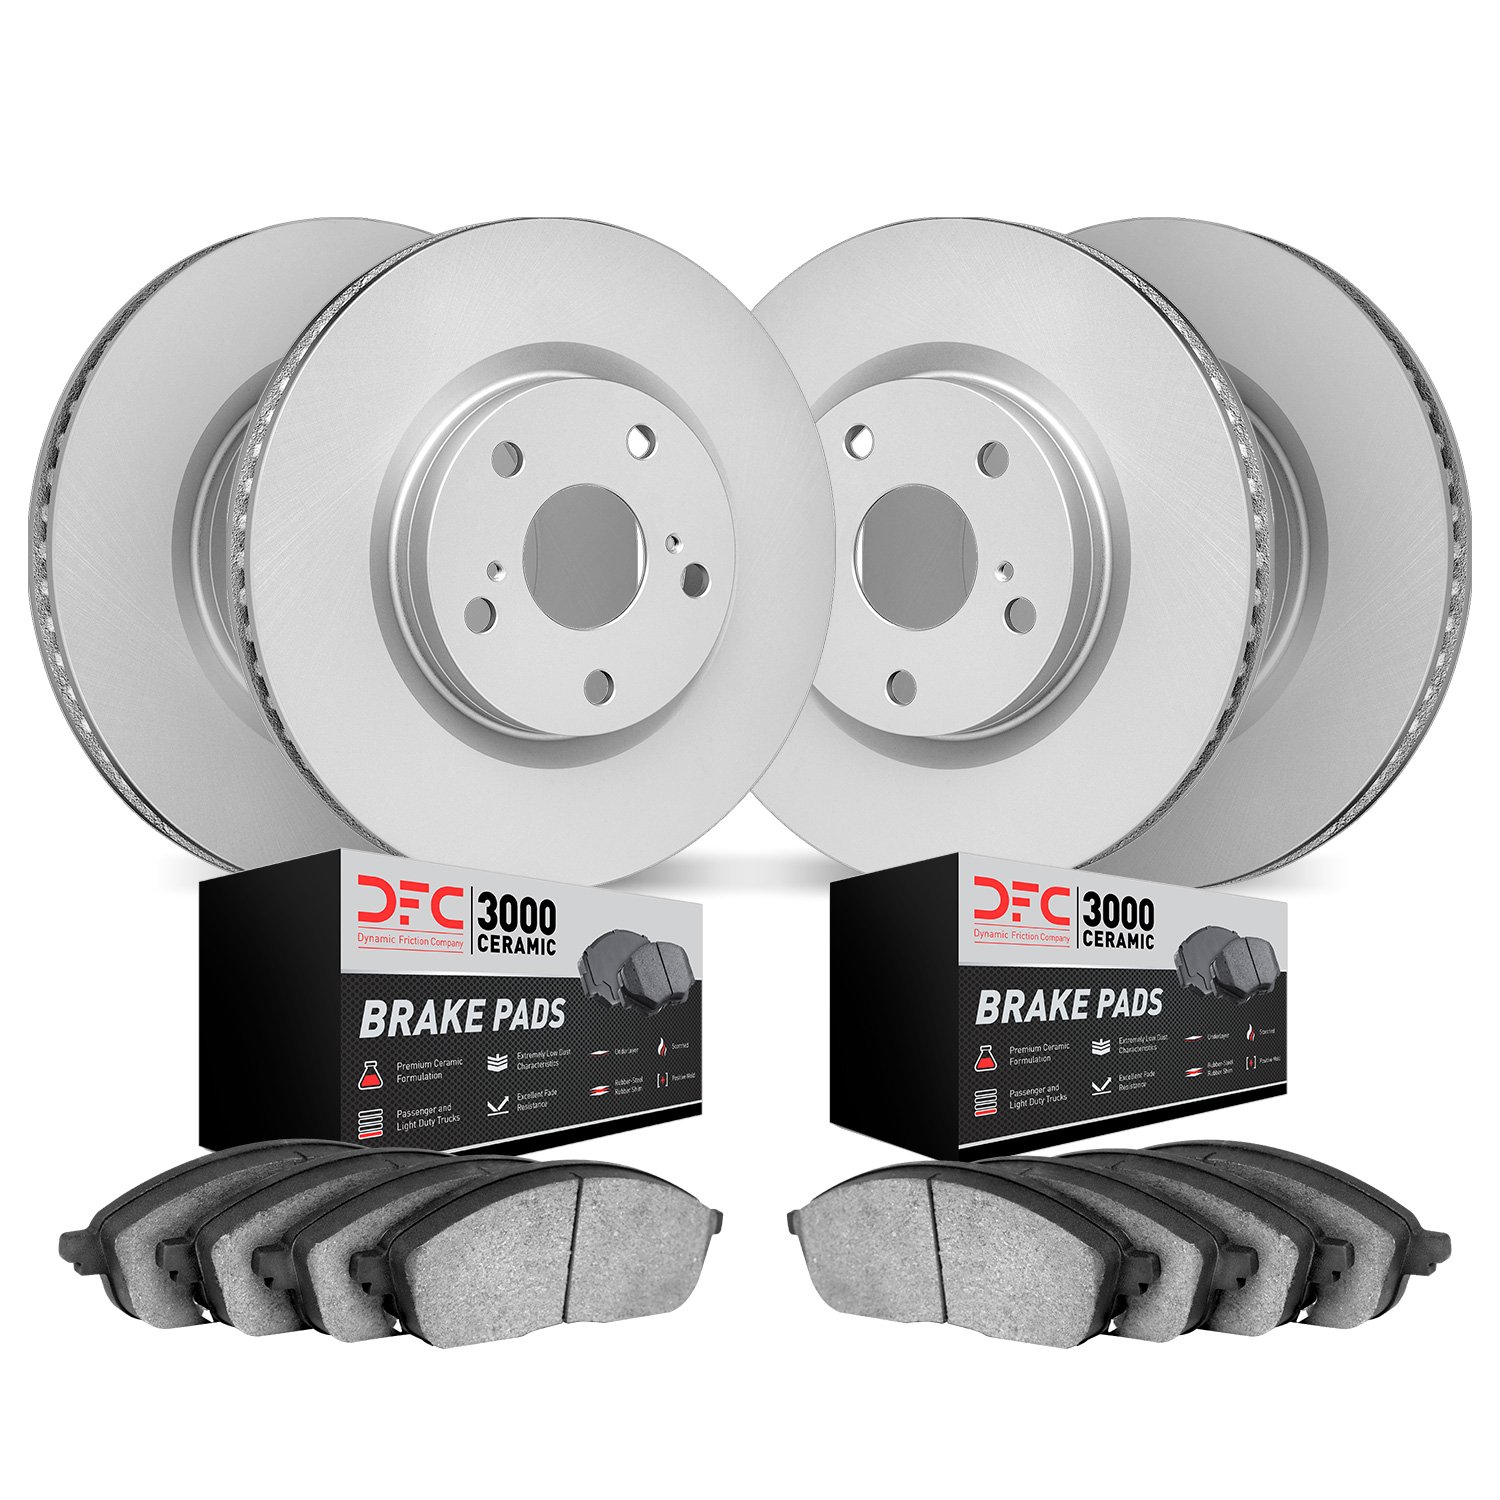 4304-31032 Geospec Brake Rotors with 3000-Series Ceramic Brake Pads Kit, 2004-2010 BMW, Position: Front and Rear